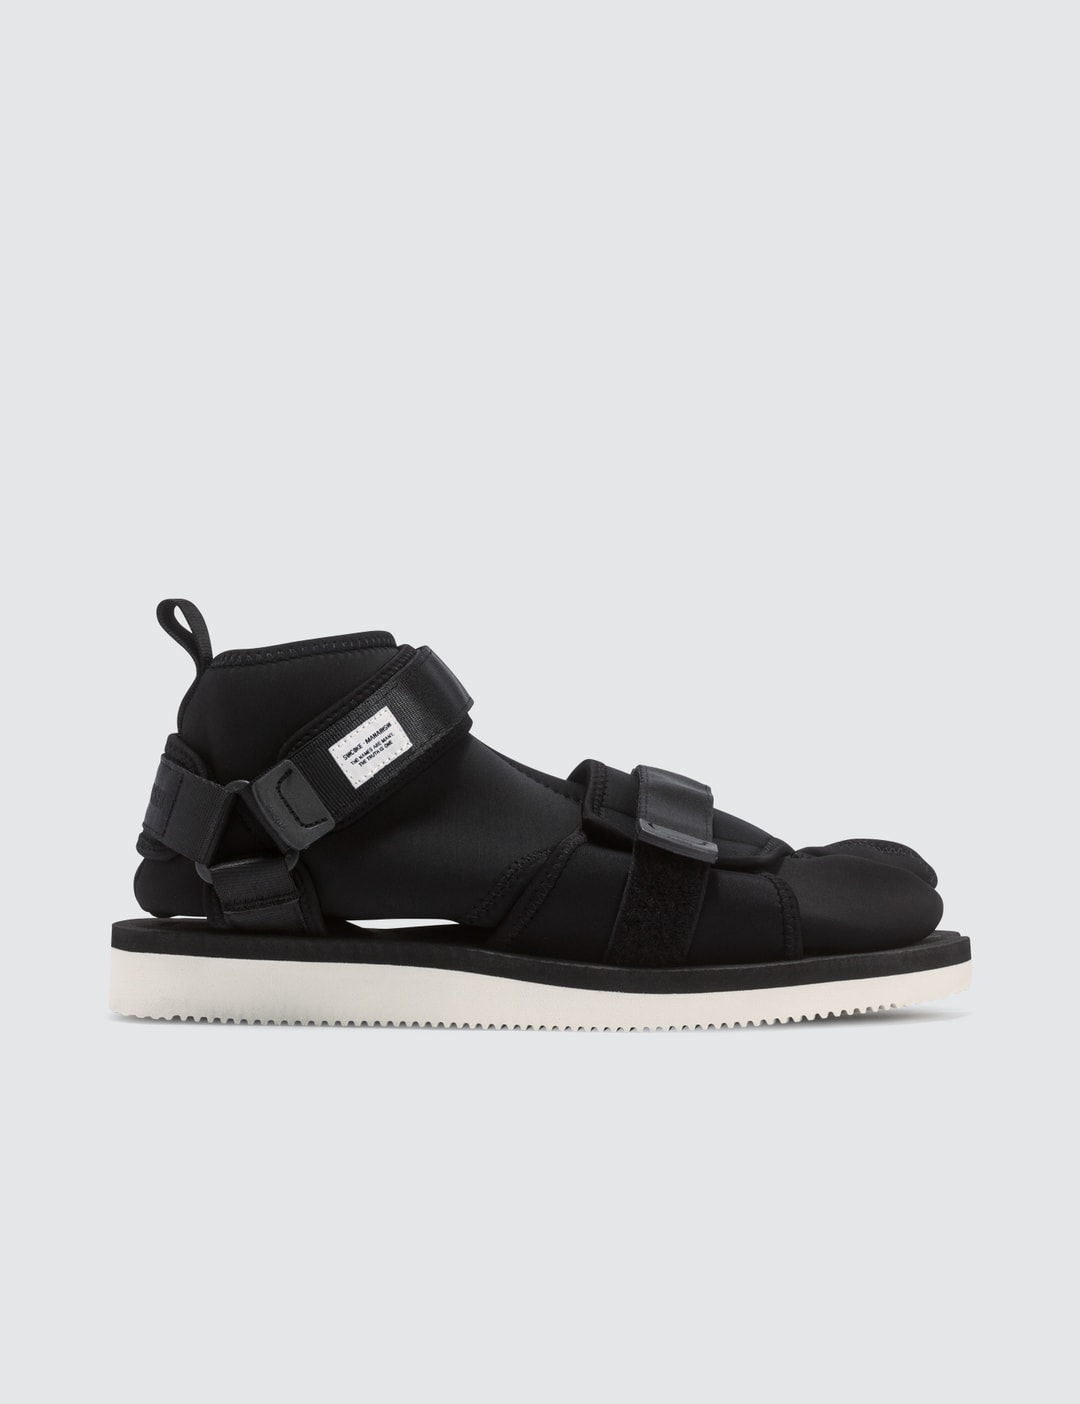 Palm Angels - Palm Angels x Suicoke Slider  HBX - Globally Curated Fashion  and Lifestyle by Hypebeast